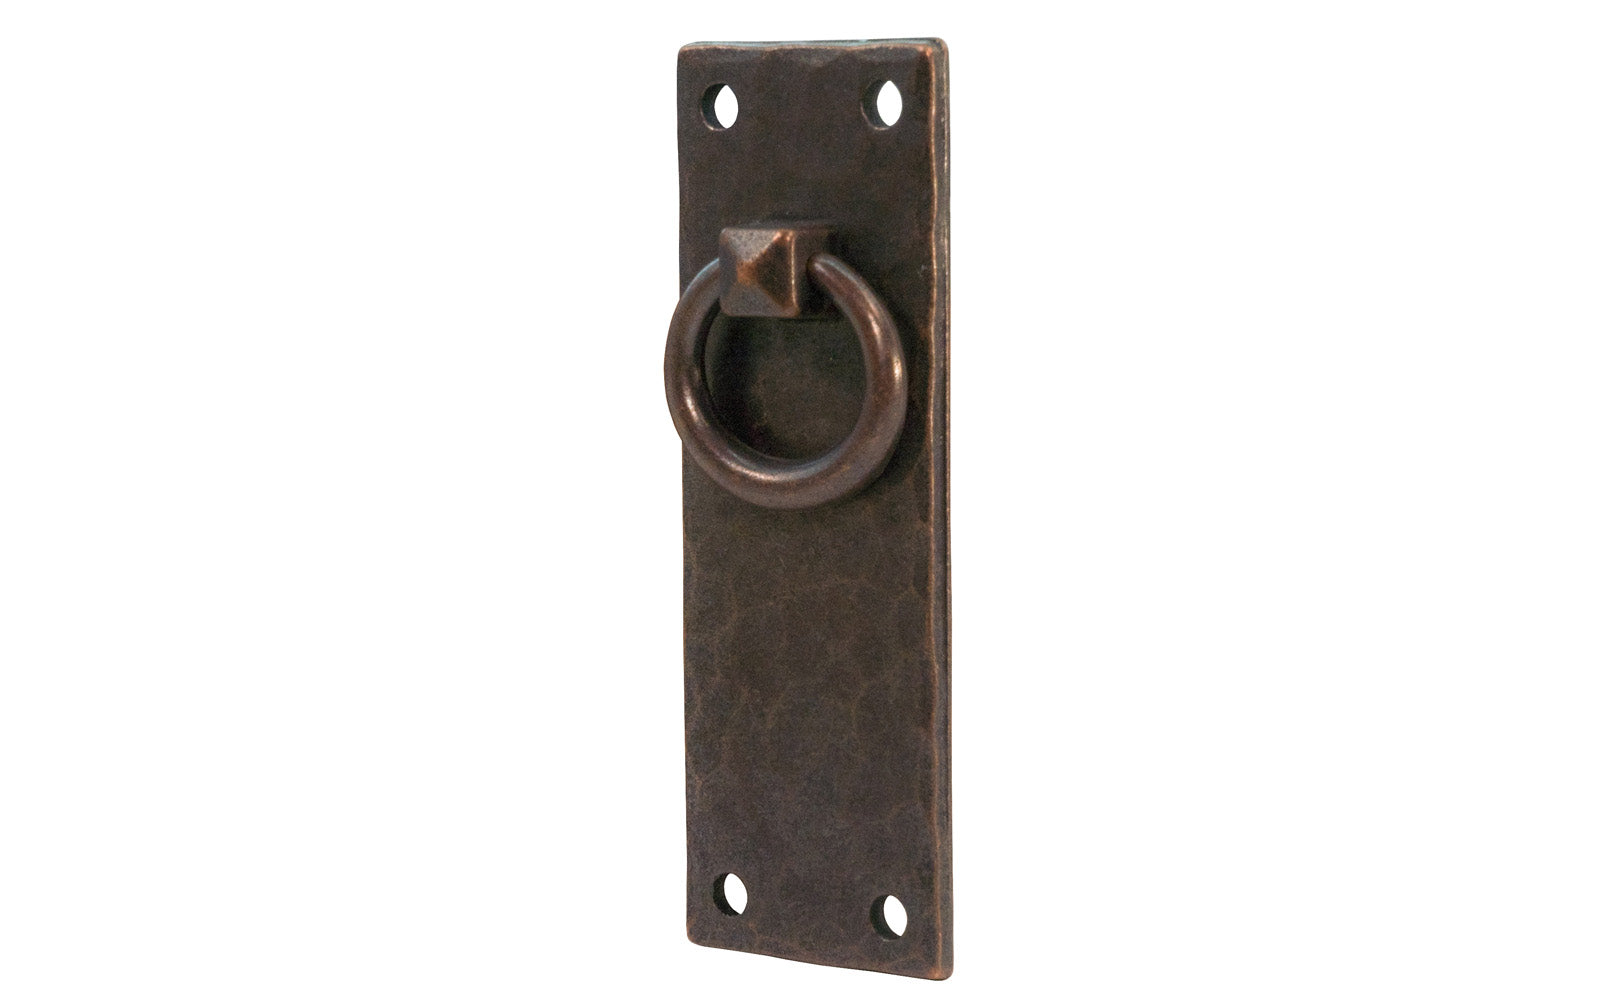 Vintage-style Hardware · Solid Brass Hammered Vertical Ring Drop Pull. Designed in the Mission or Arts & Crafts style, Gustav Stickley style hardware. Rustic hammered drop pull. Antique copper finish. Four round-head slotted screws. Thick solid brass drop pull plate. 4" high x 1-3/8" wide plate. Reproduction hardware.